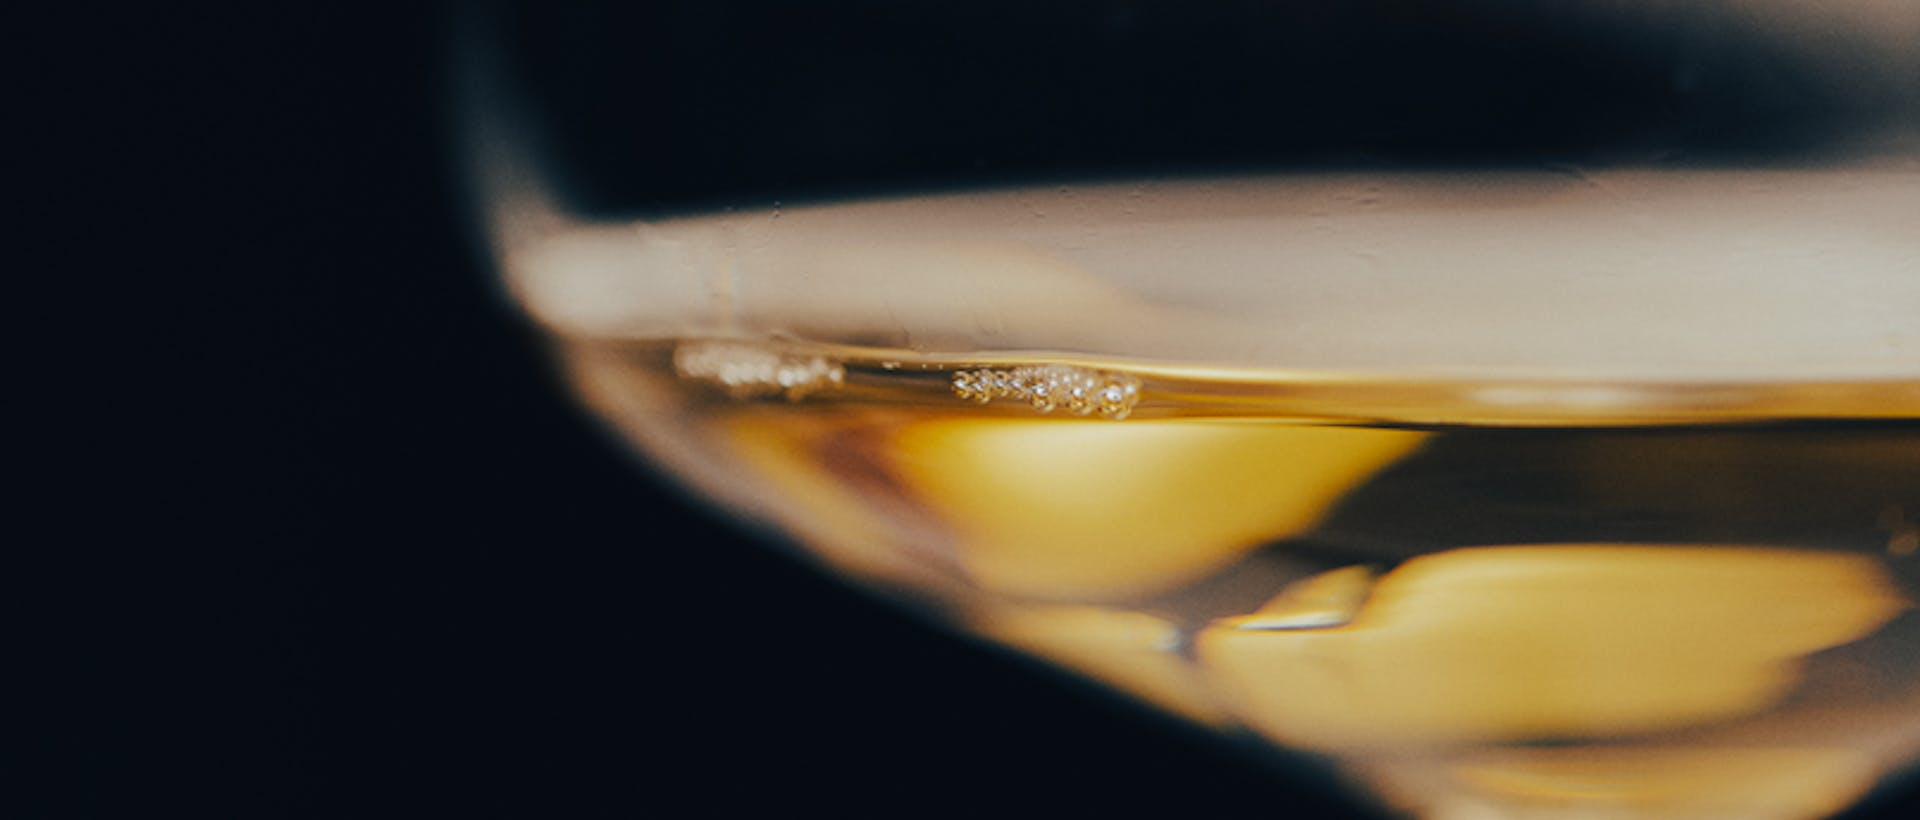 close-up of wine glass with a small amount of white wine in it